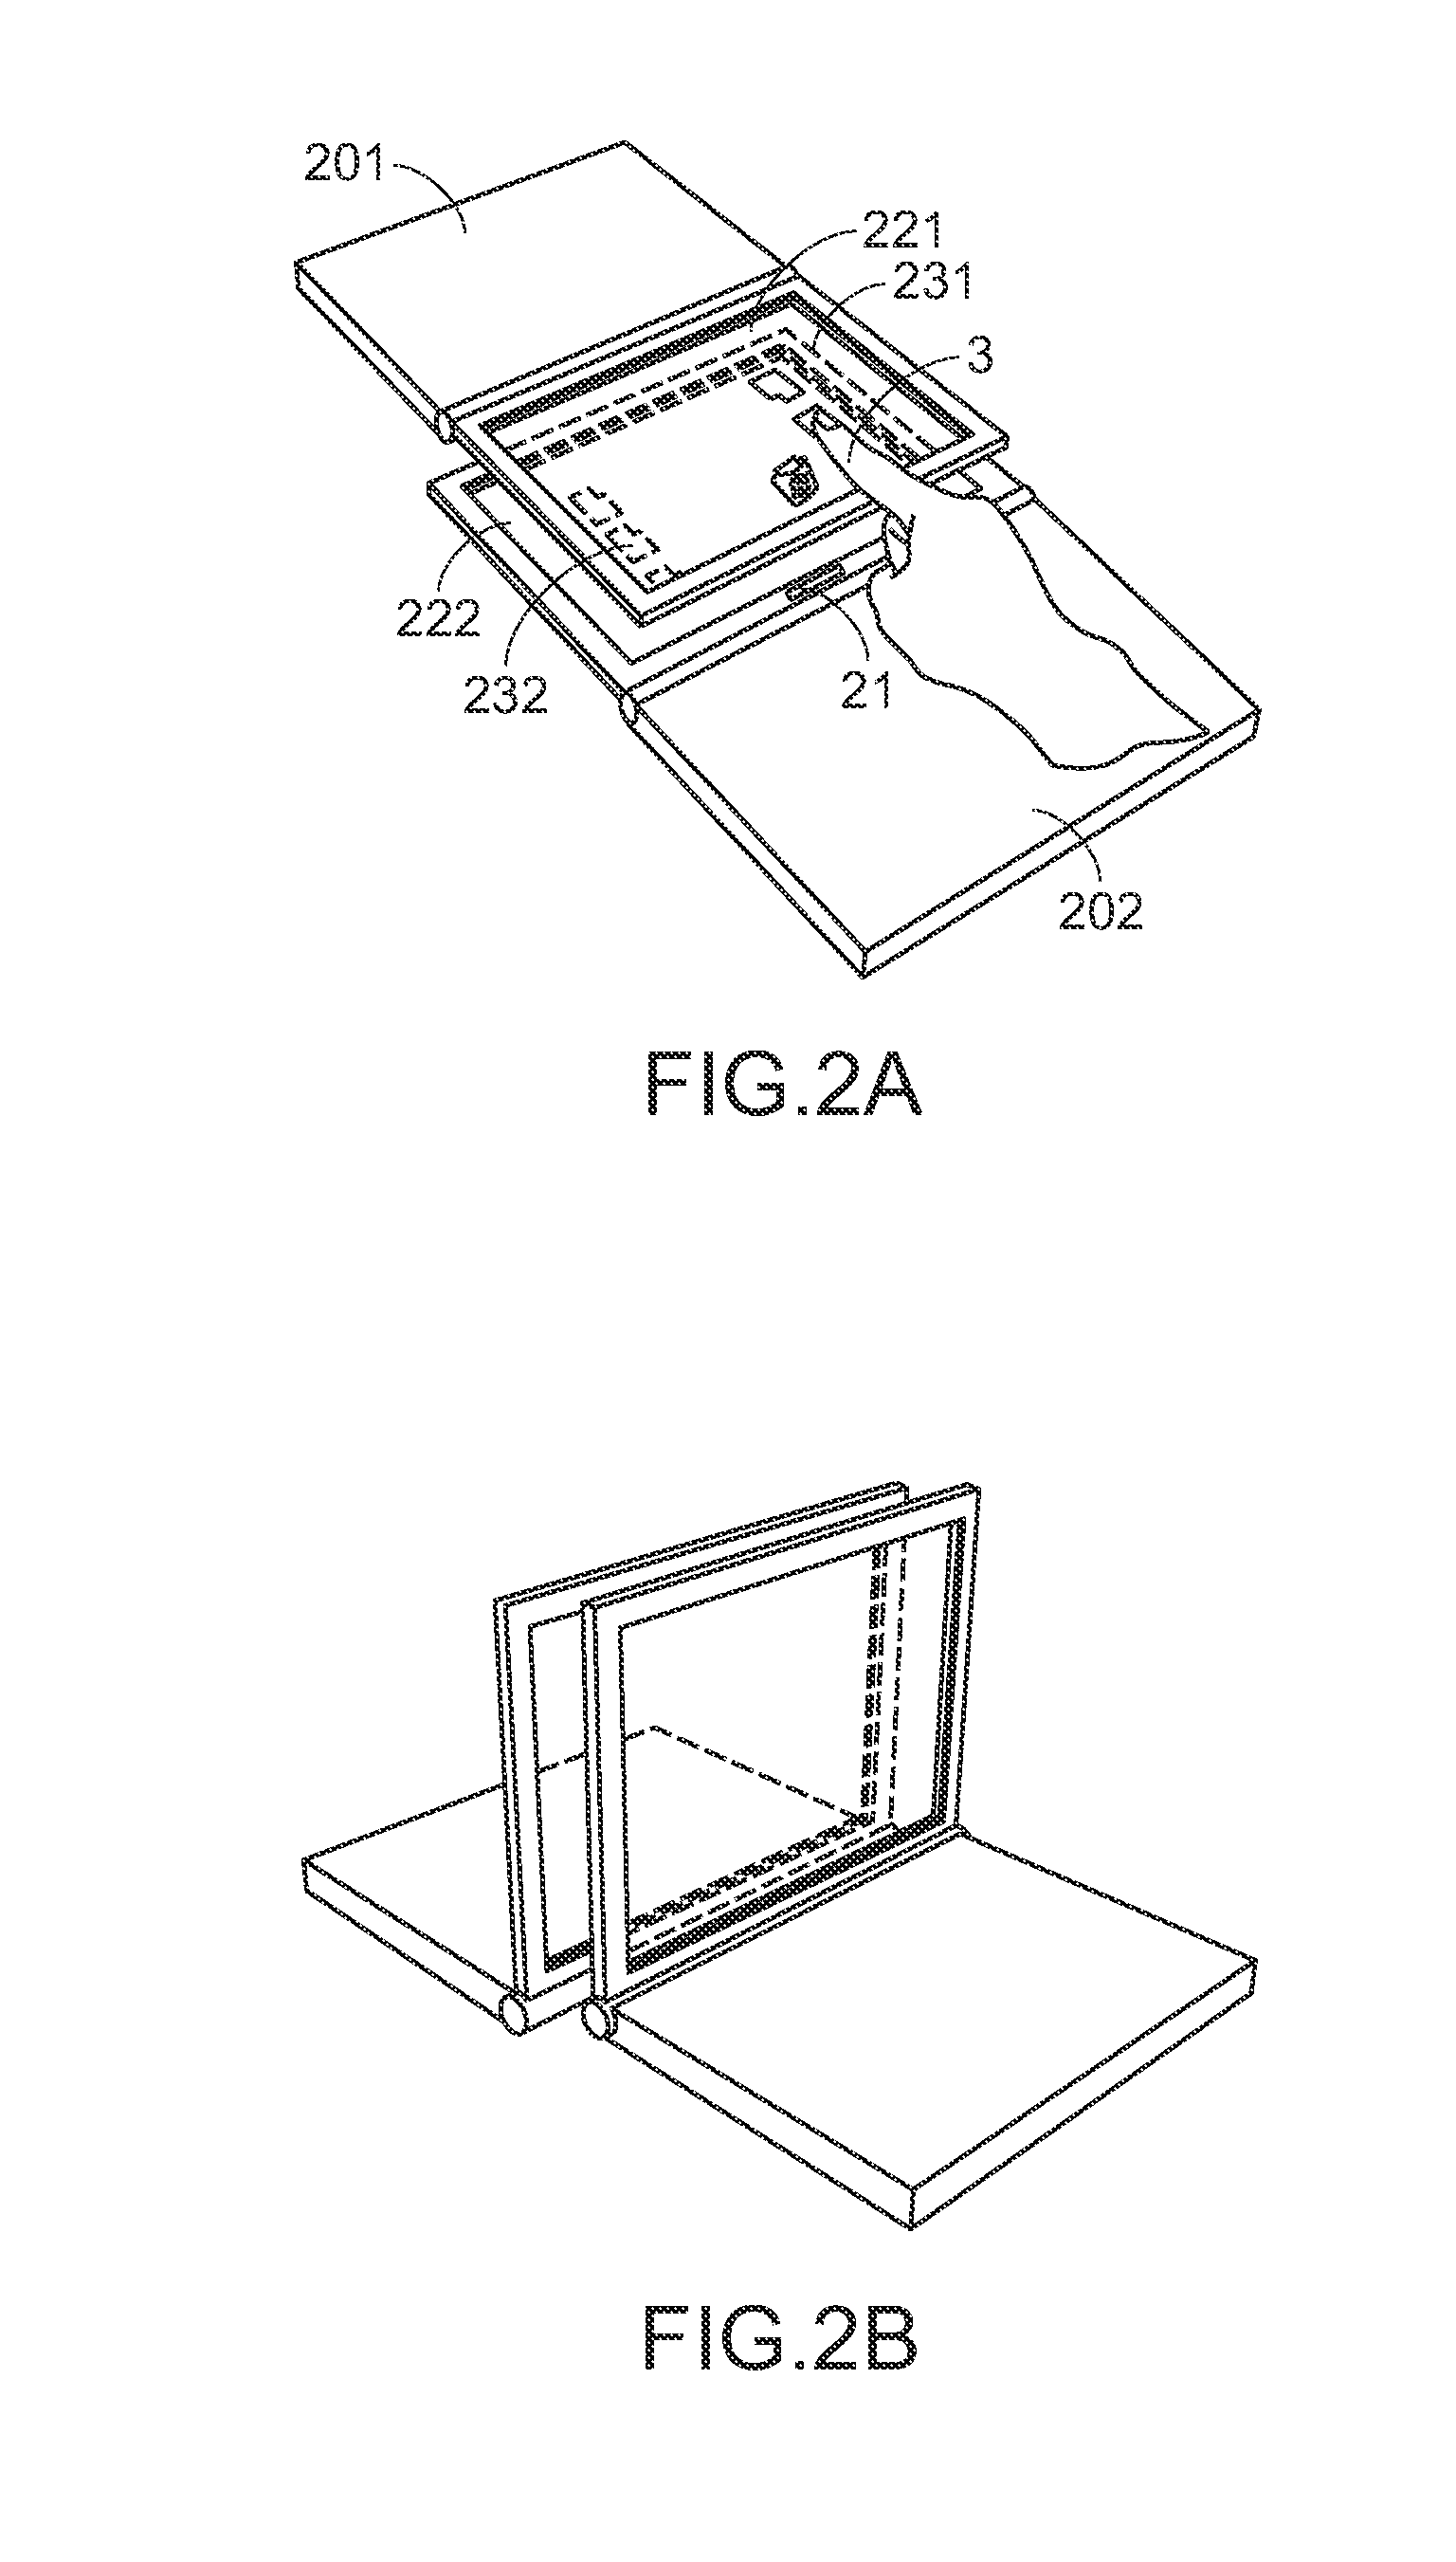 File sharing method and system